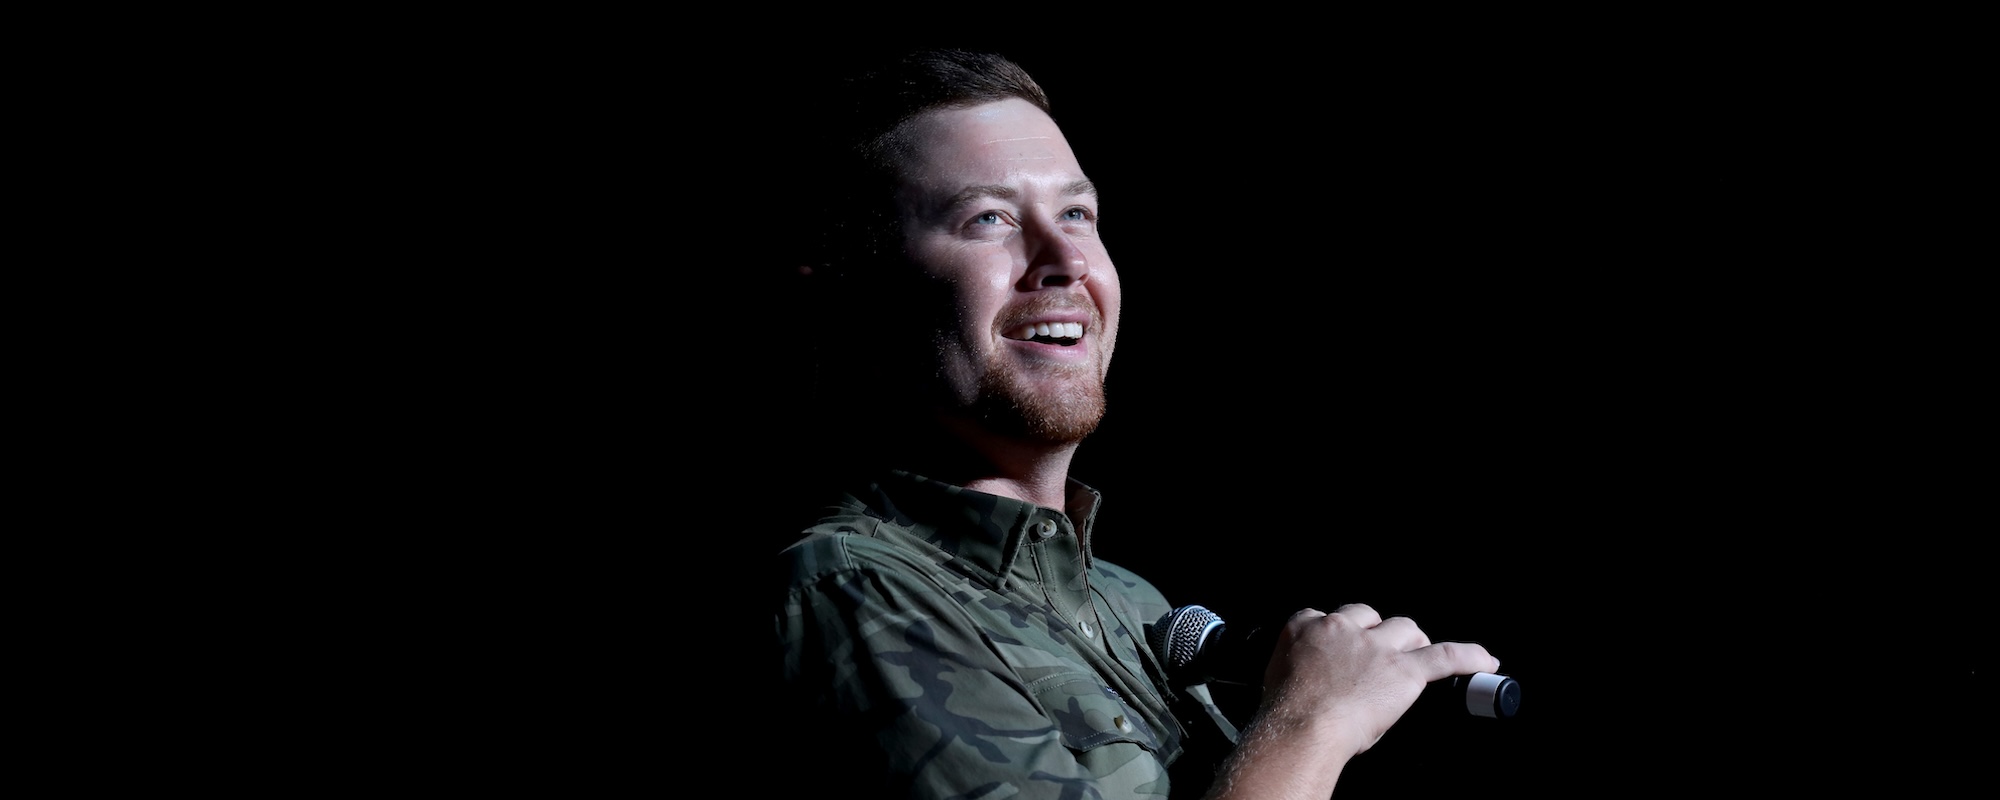 Where Are They Now? Scotty McCreery’s Journey From Season 10 ‘American Idol’ Champ, Family, and the Grand Ole Opry